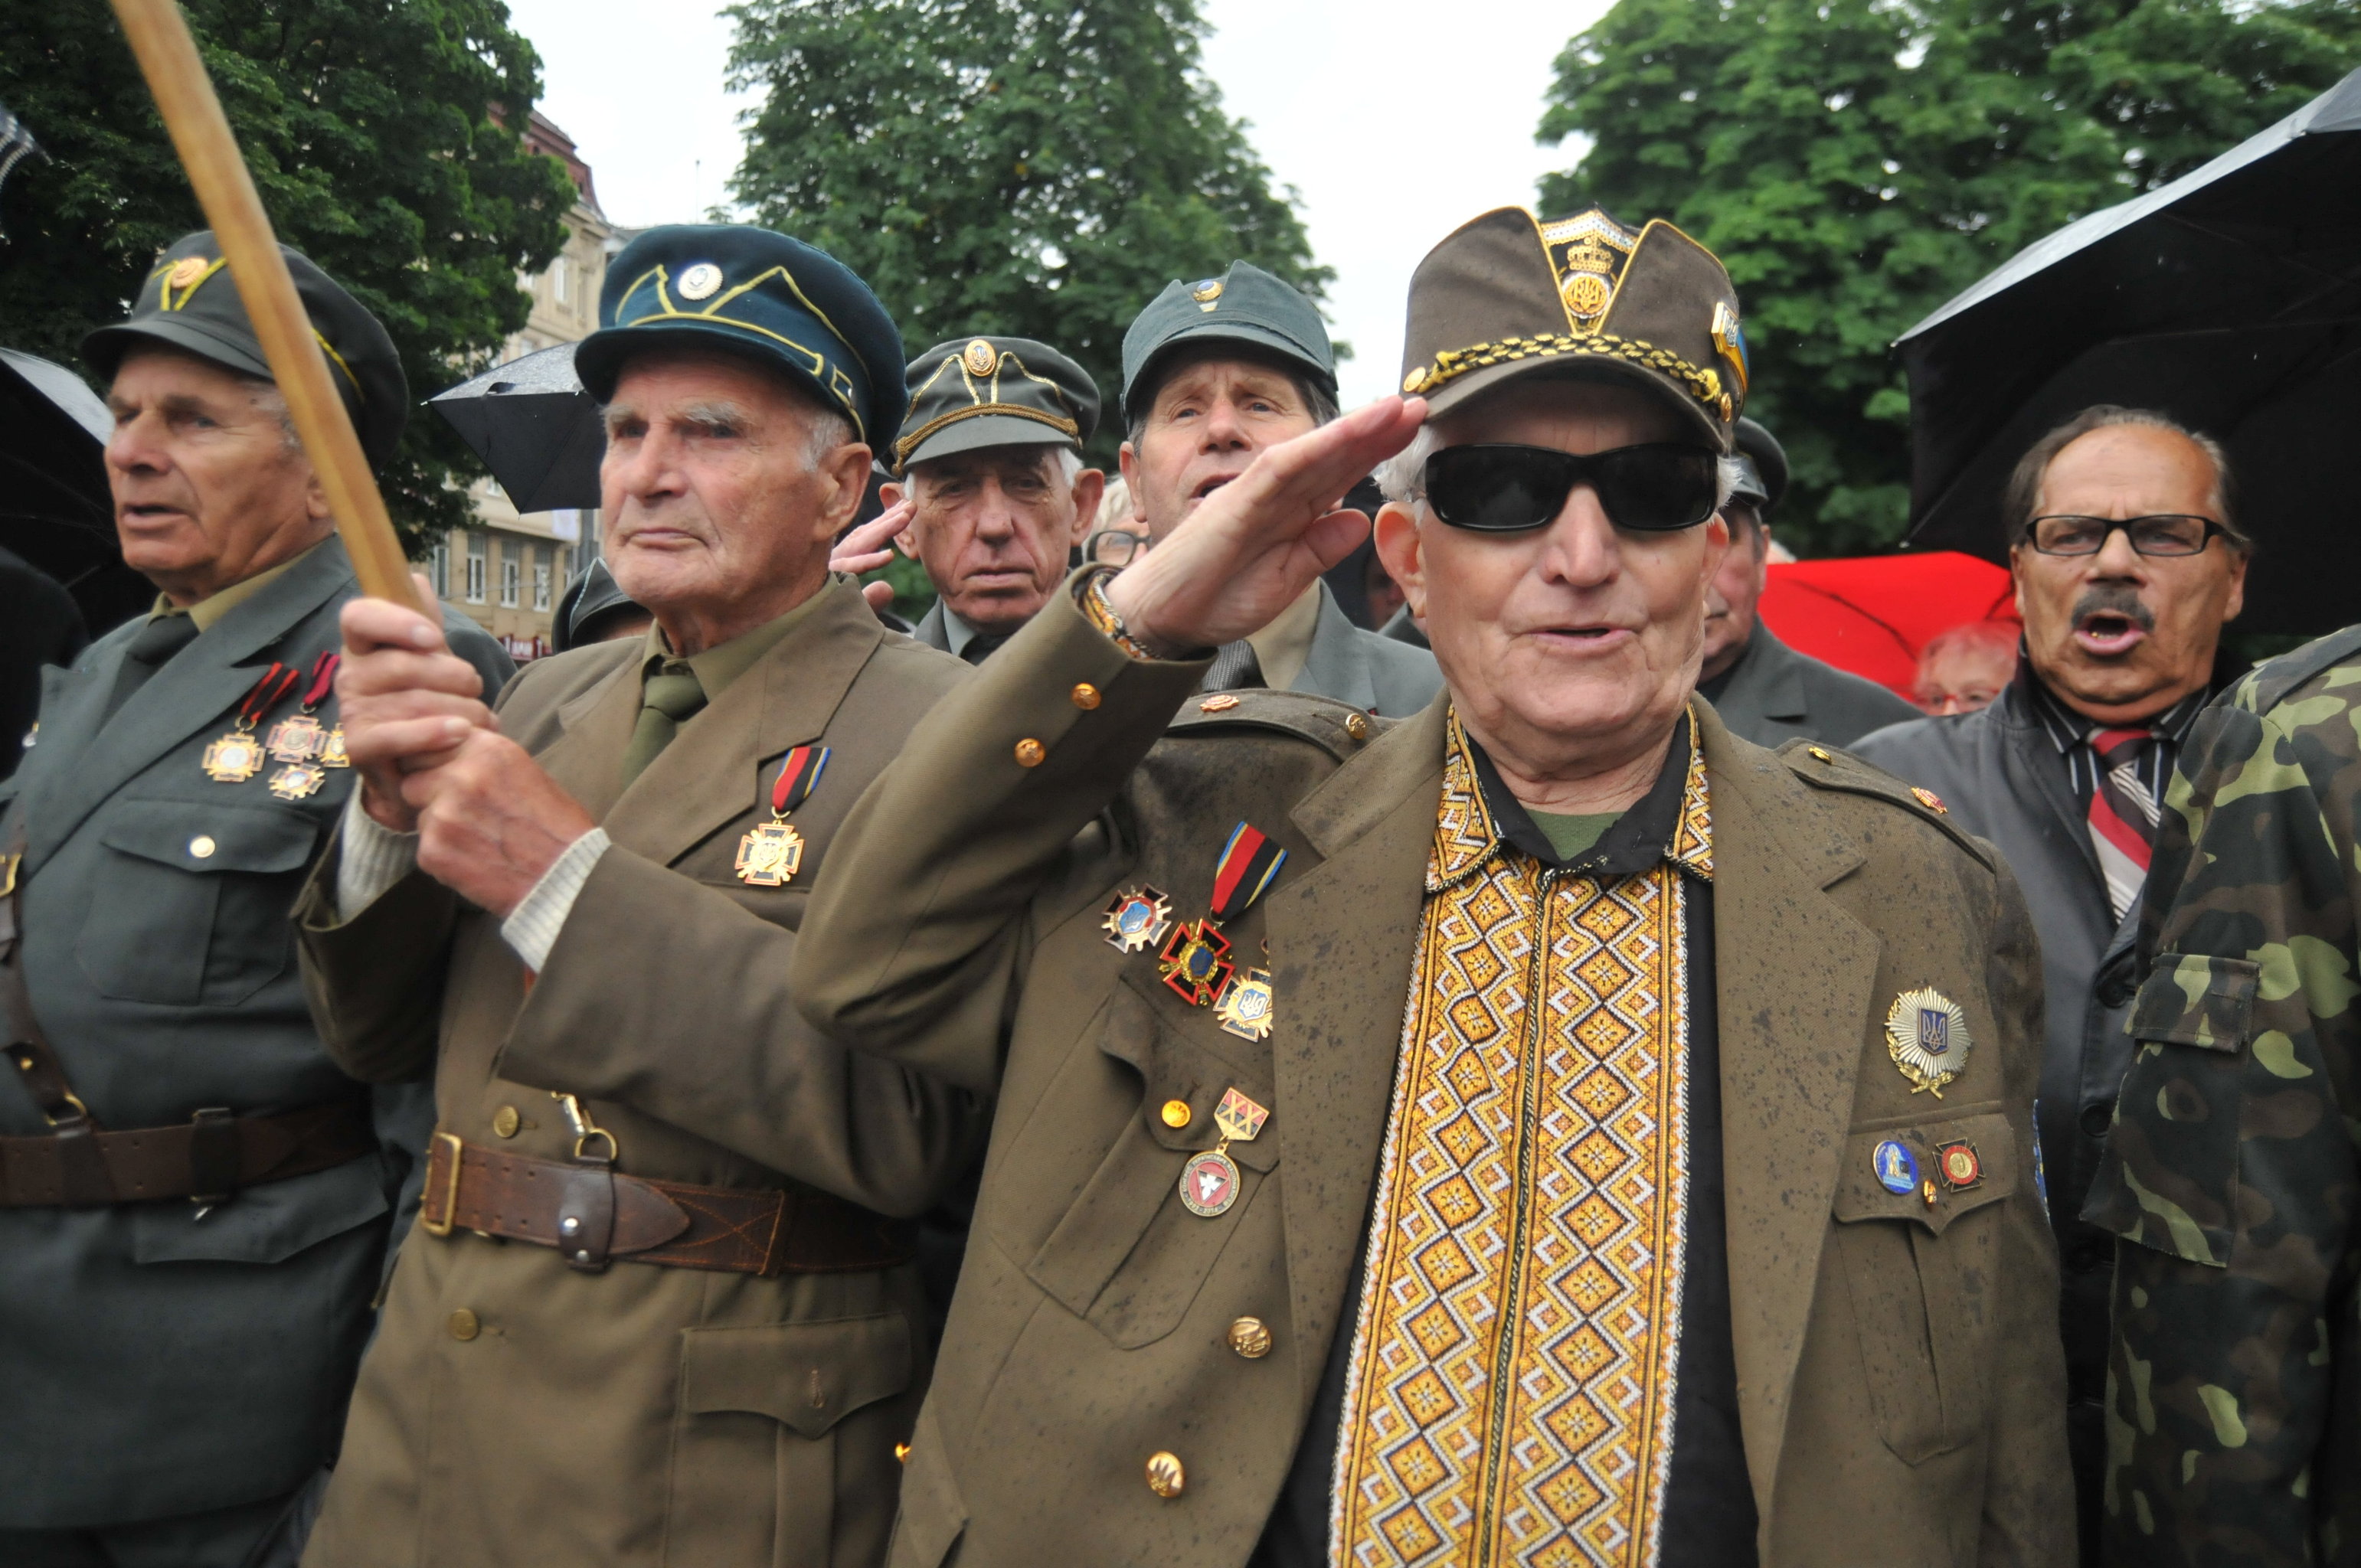 Heroes Day celebrated in Lviv